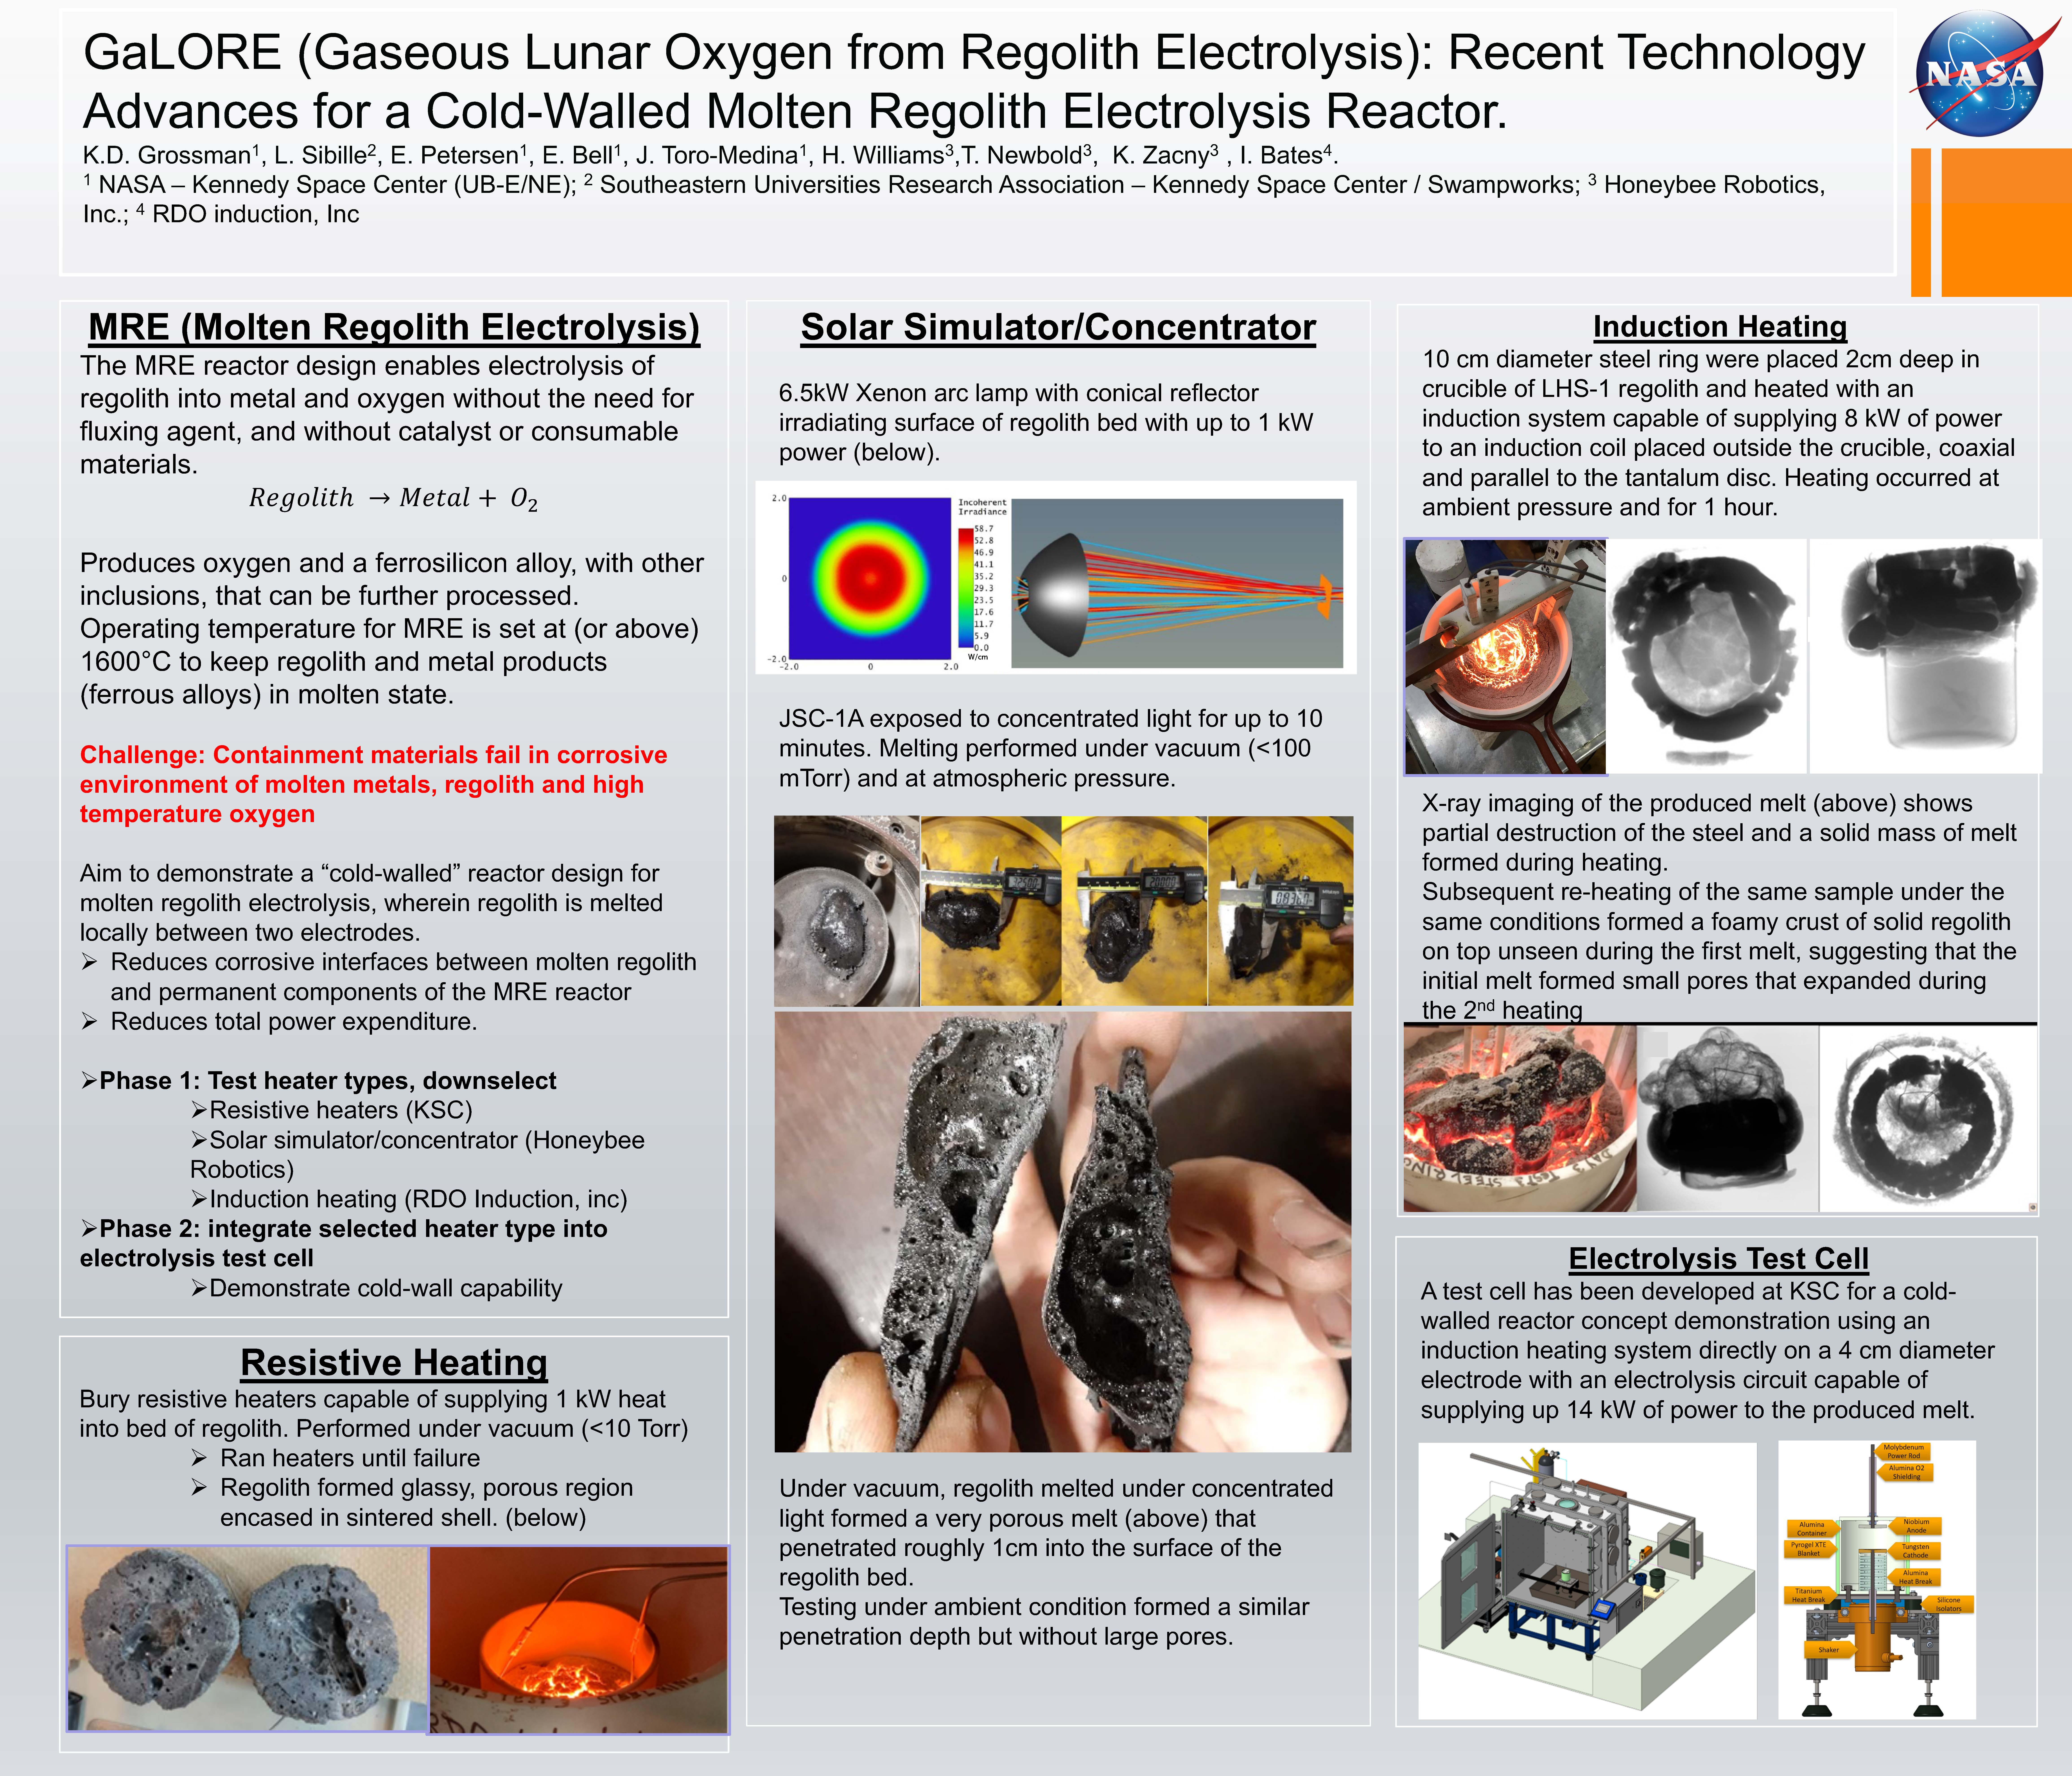 GaLORE (Gaseous Lunar Oxygen from Regolith Electrolysis): Recent Technology Advances for a Cold-Walled Molten Regolith Electrolysis Reactor.